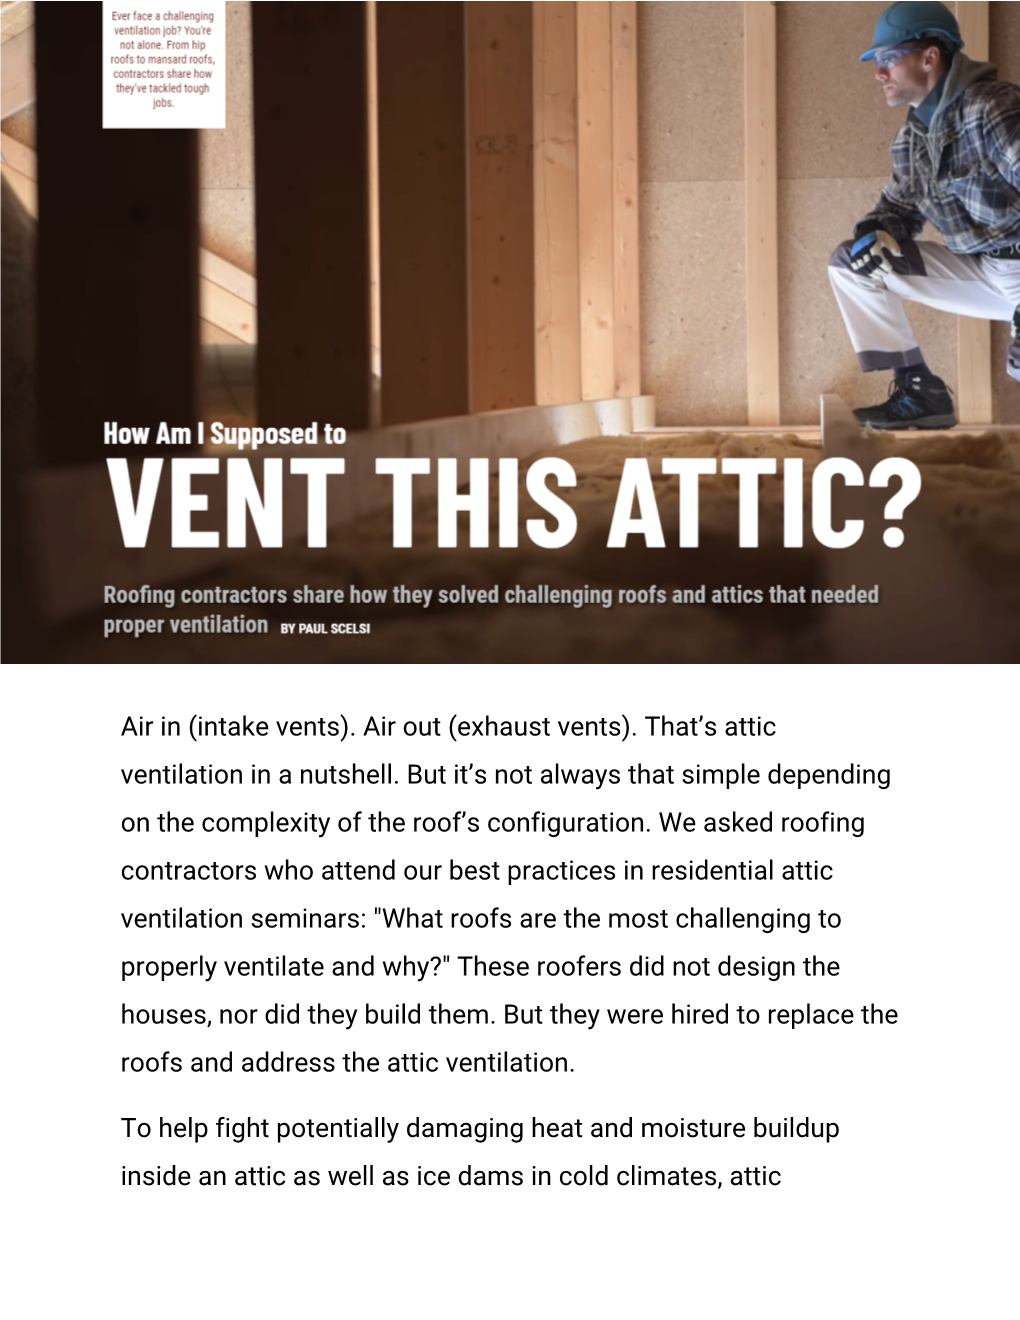 Air in (Intake Vents). Air out (Exhaust Vents). That's Attic Ventilation in A